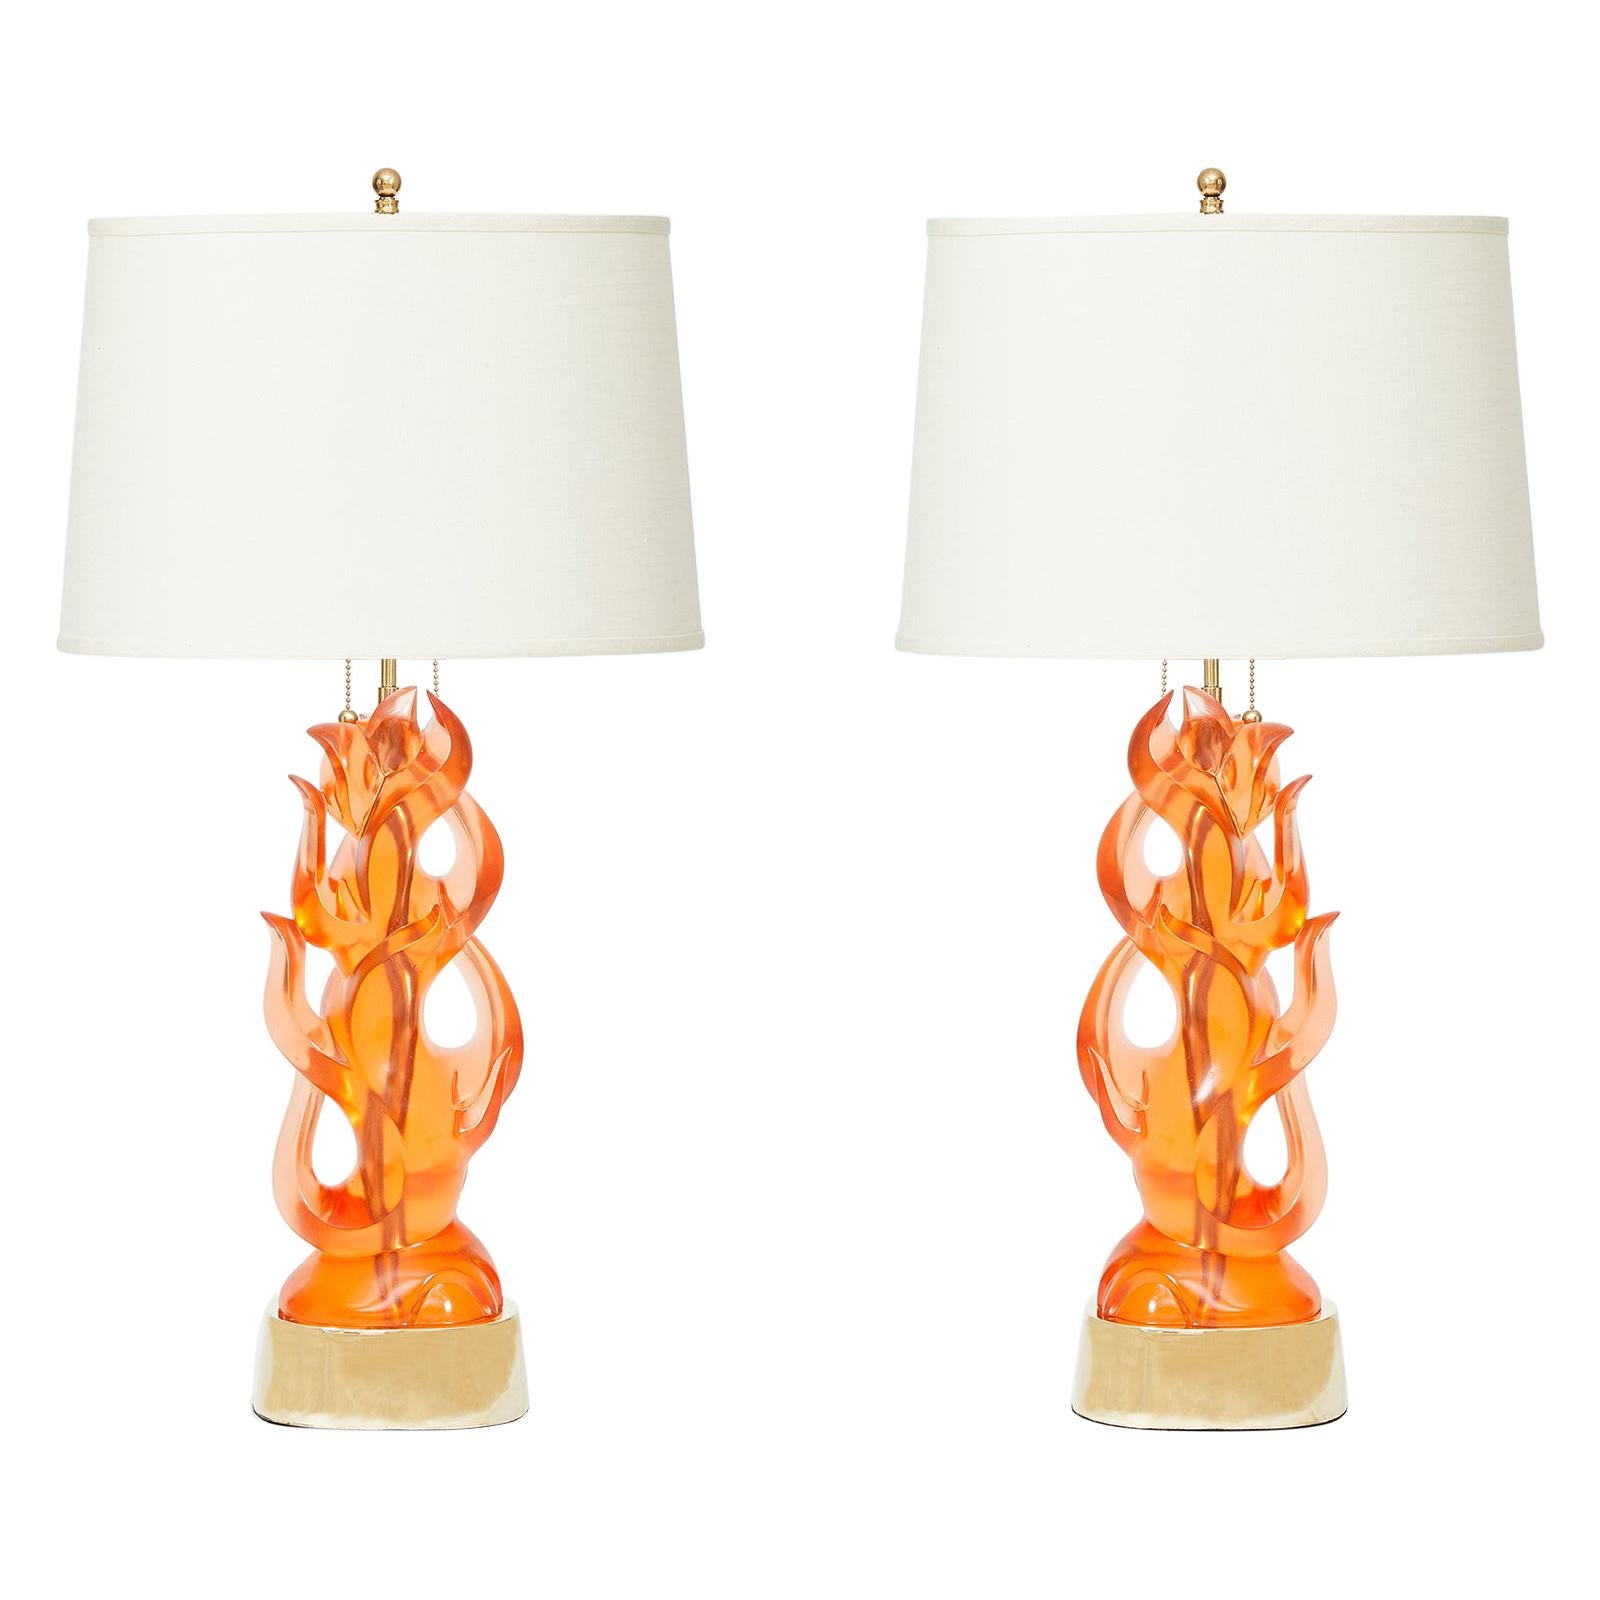 Pair of Candela Lamps in Tangerine by David Duncan Studio For Sale